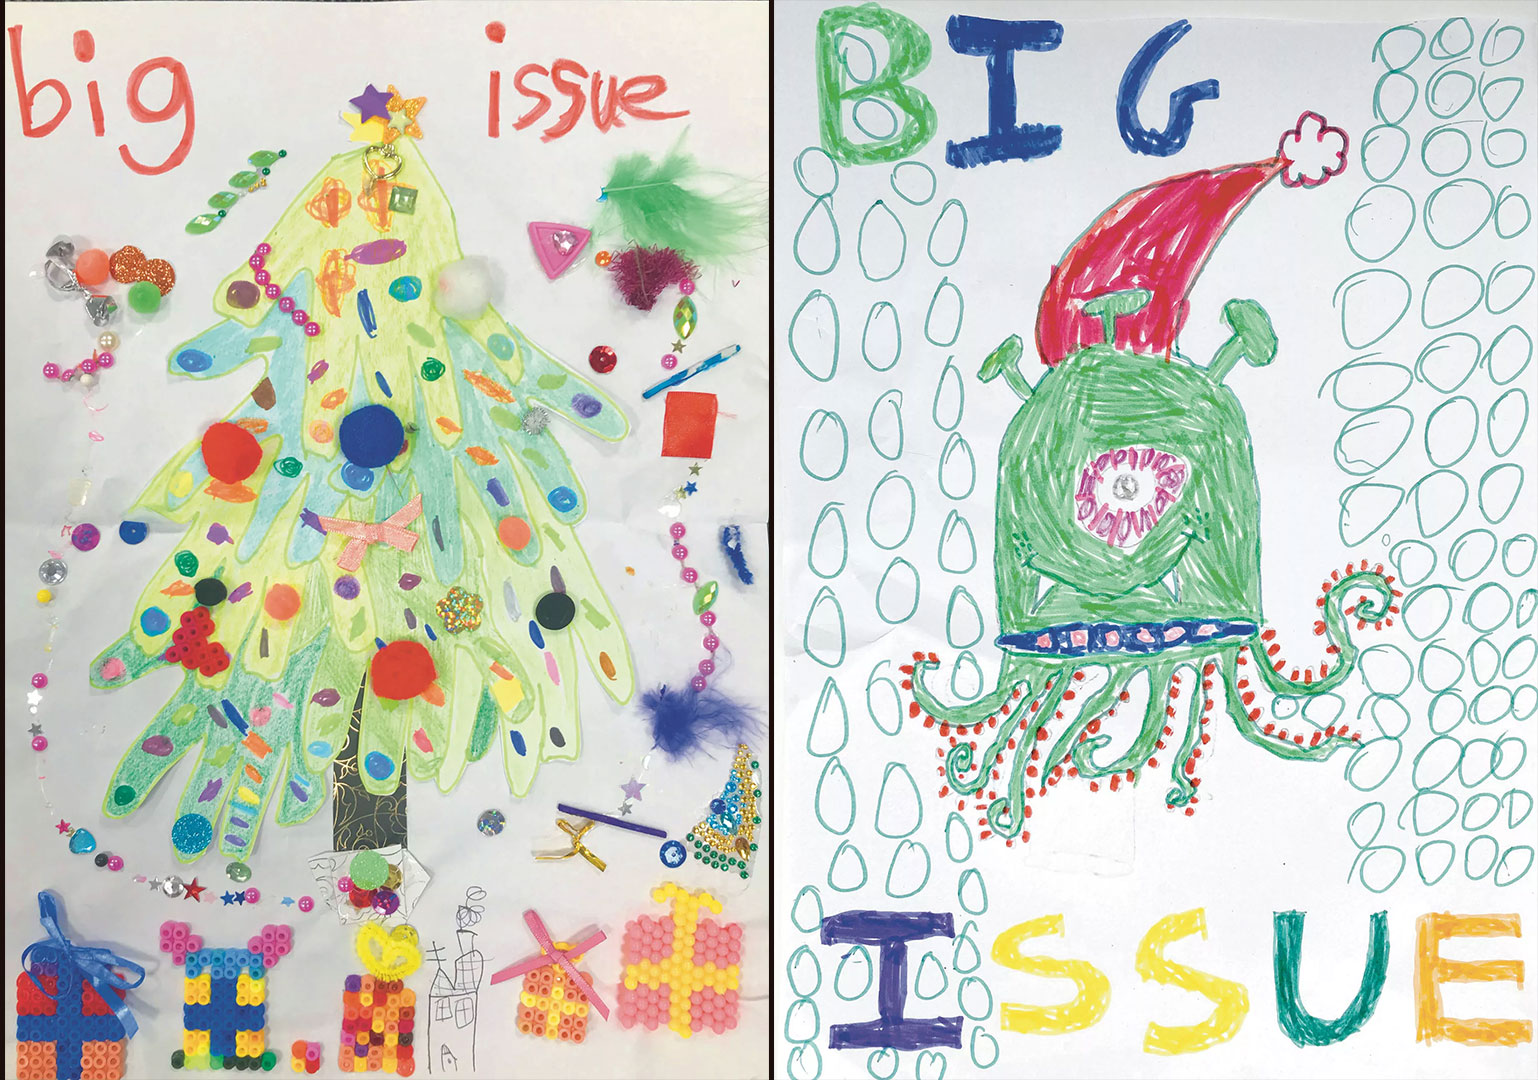 Big Issue Christmas Kids Cover Competition runners up